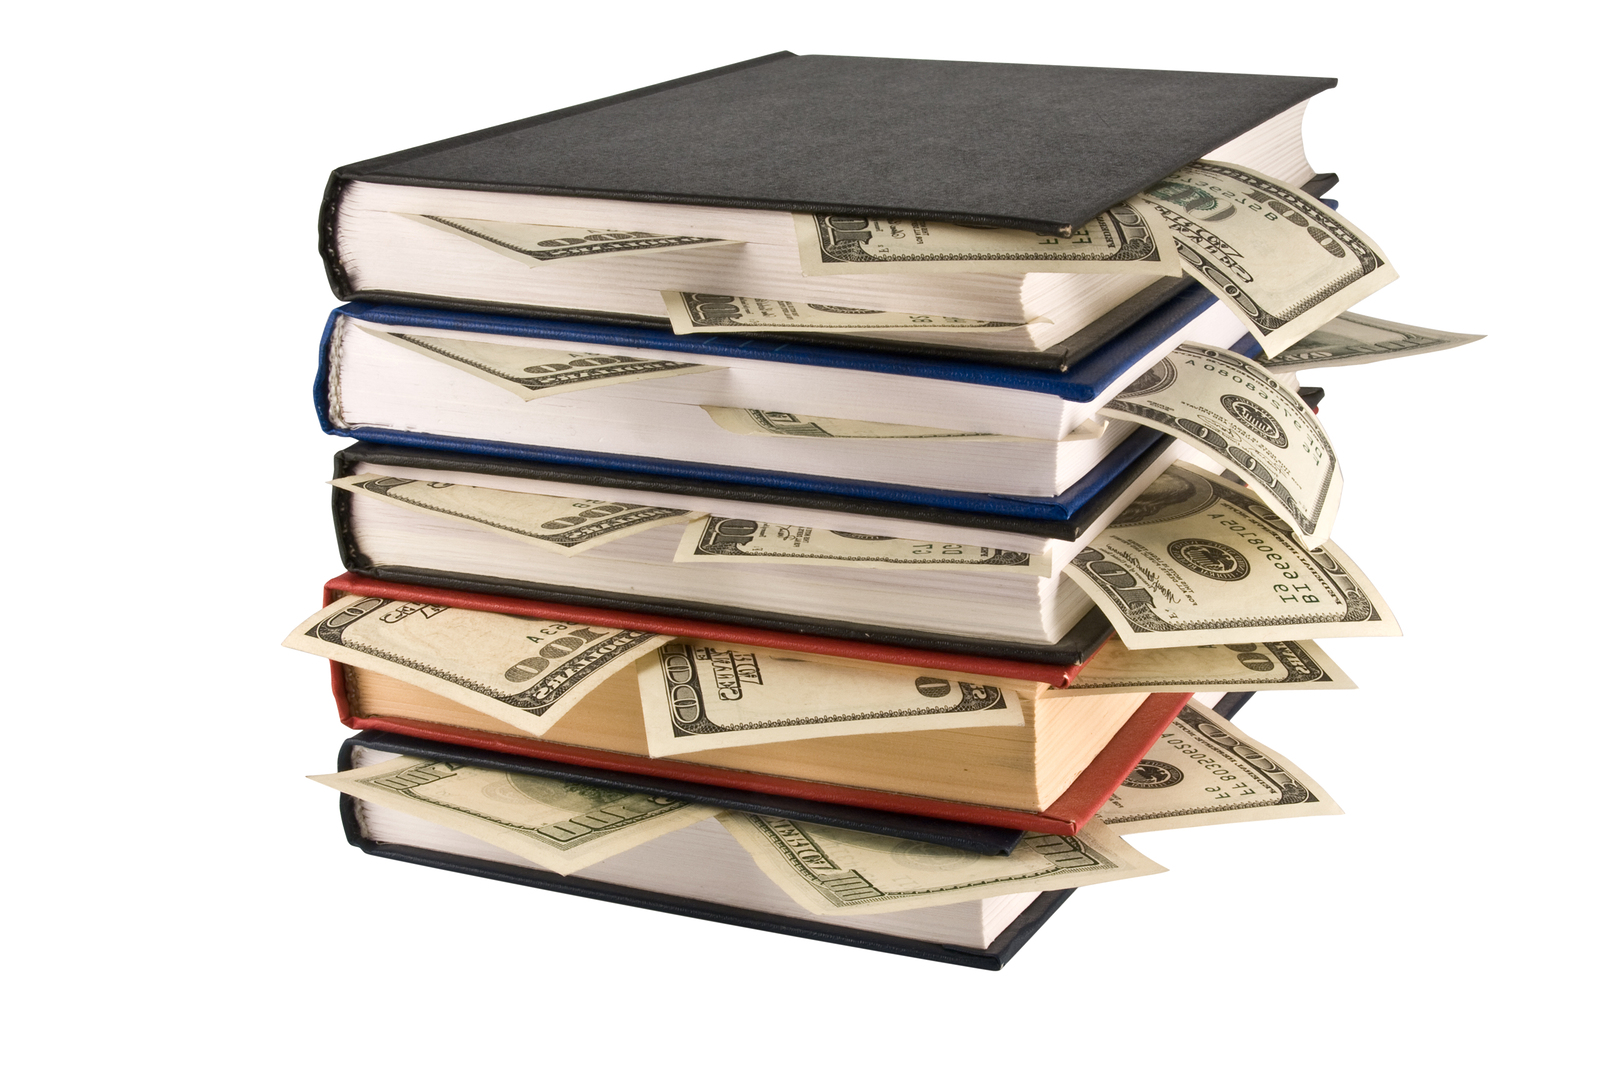 Sell Books For Cash Compare | sellbooksfast.com